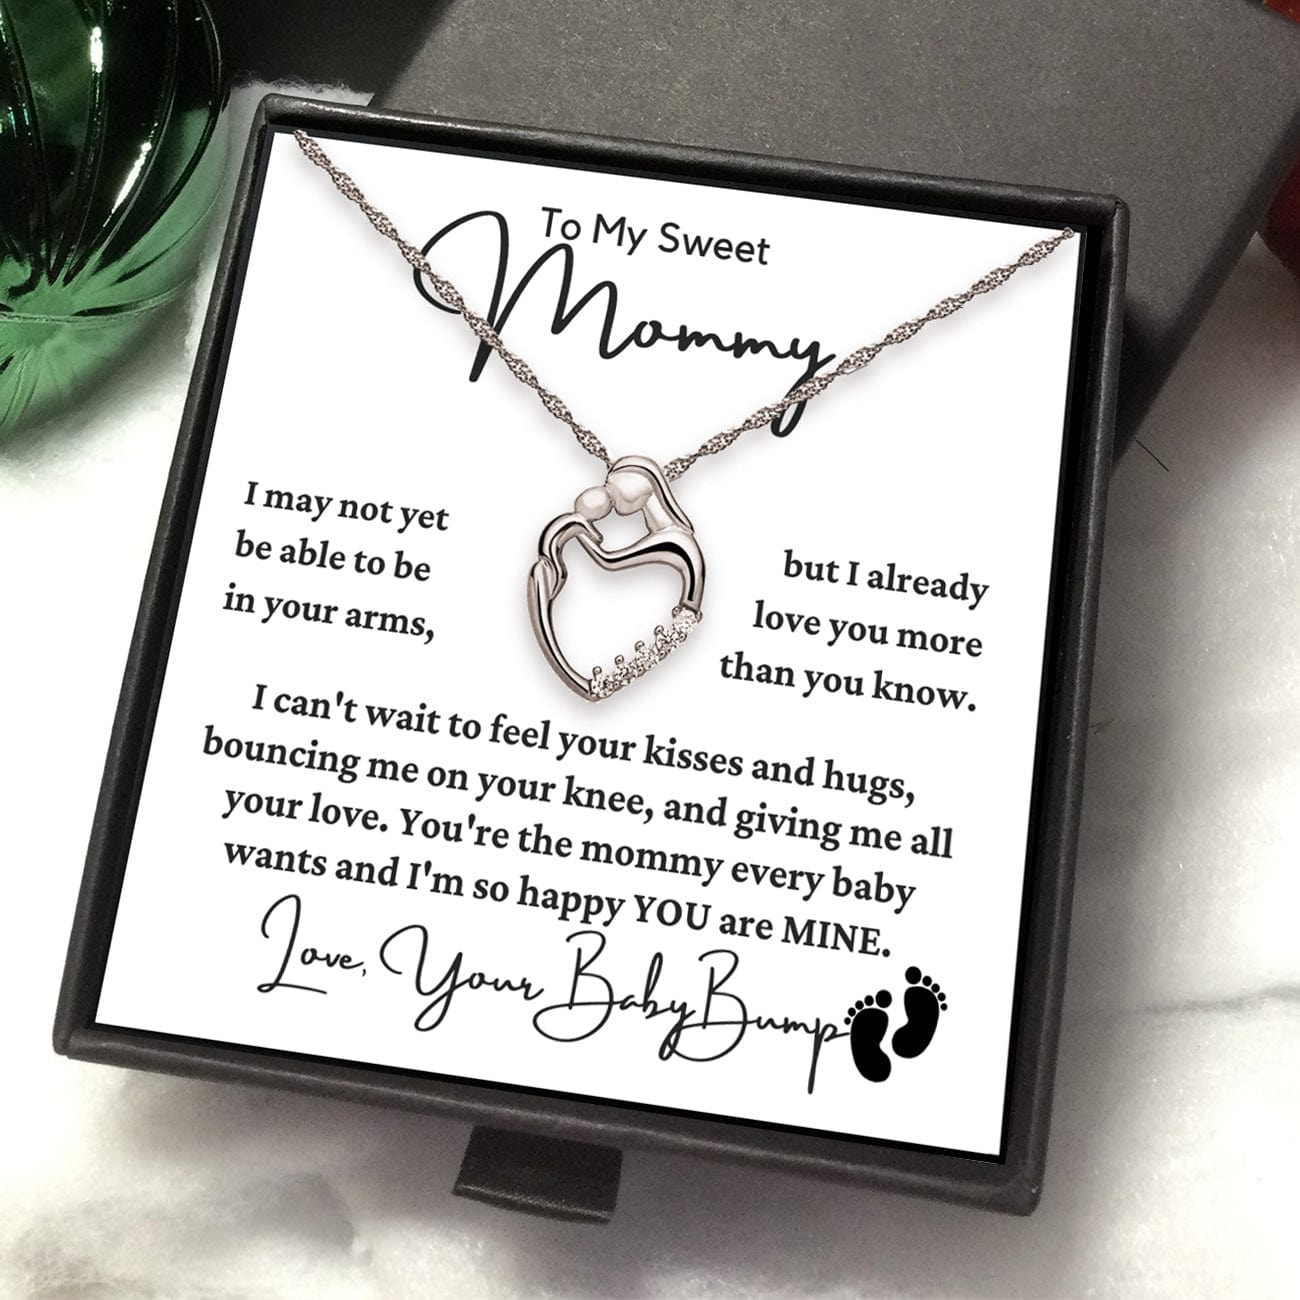 To Soon-to-be Mom From Baby Bump "I may be just a bump..." Mom Heart Necklace